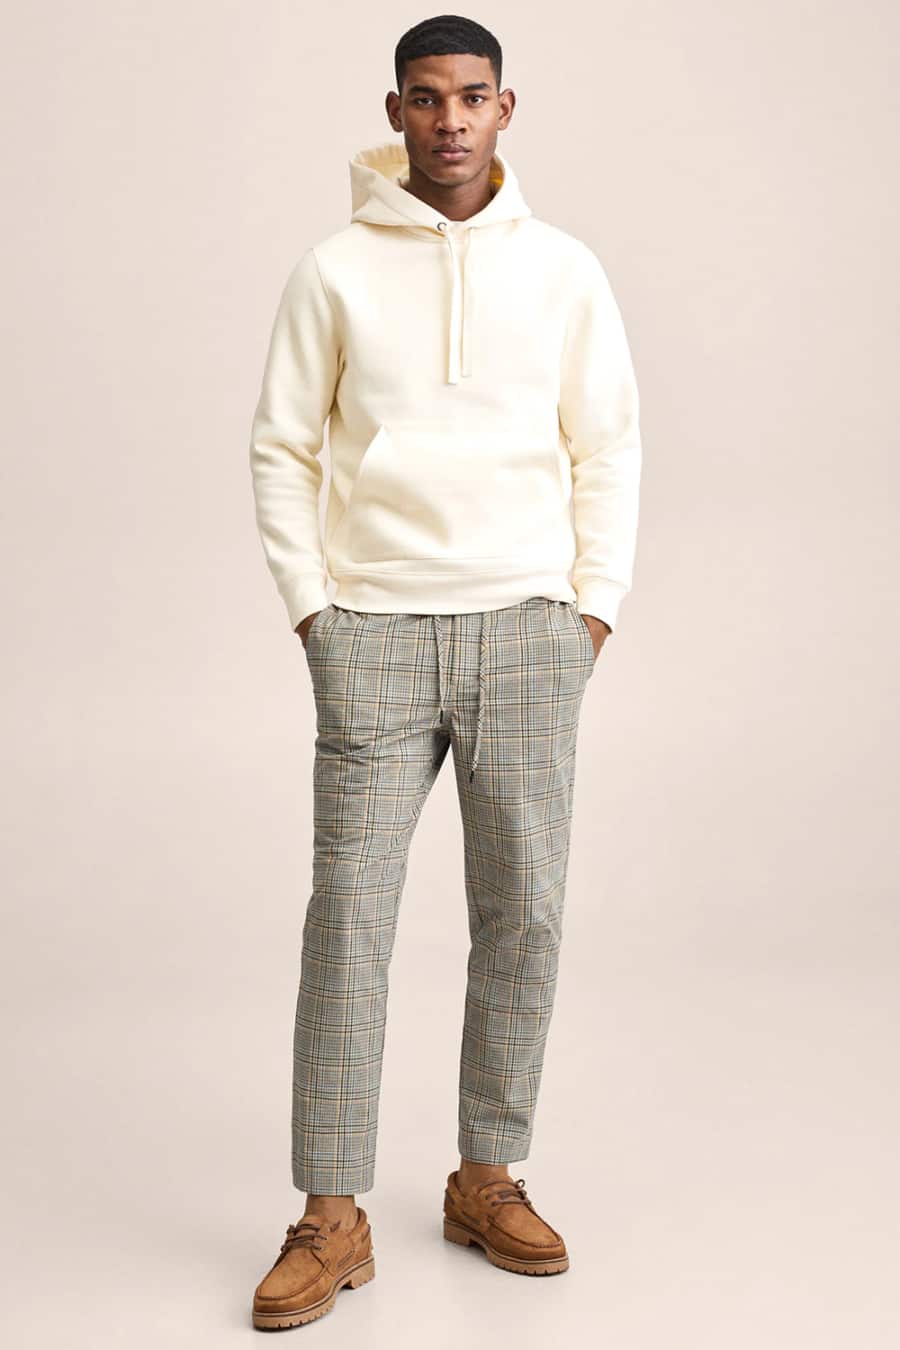 Men's small check pants, white hoodie and boat shoes preppy streetwearoutfit